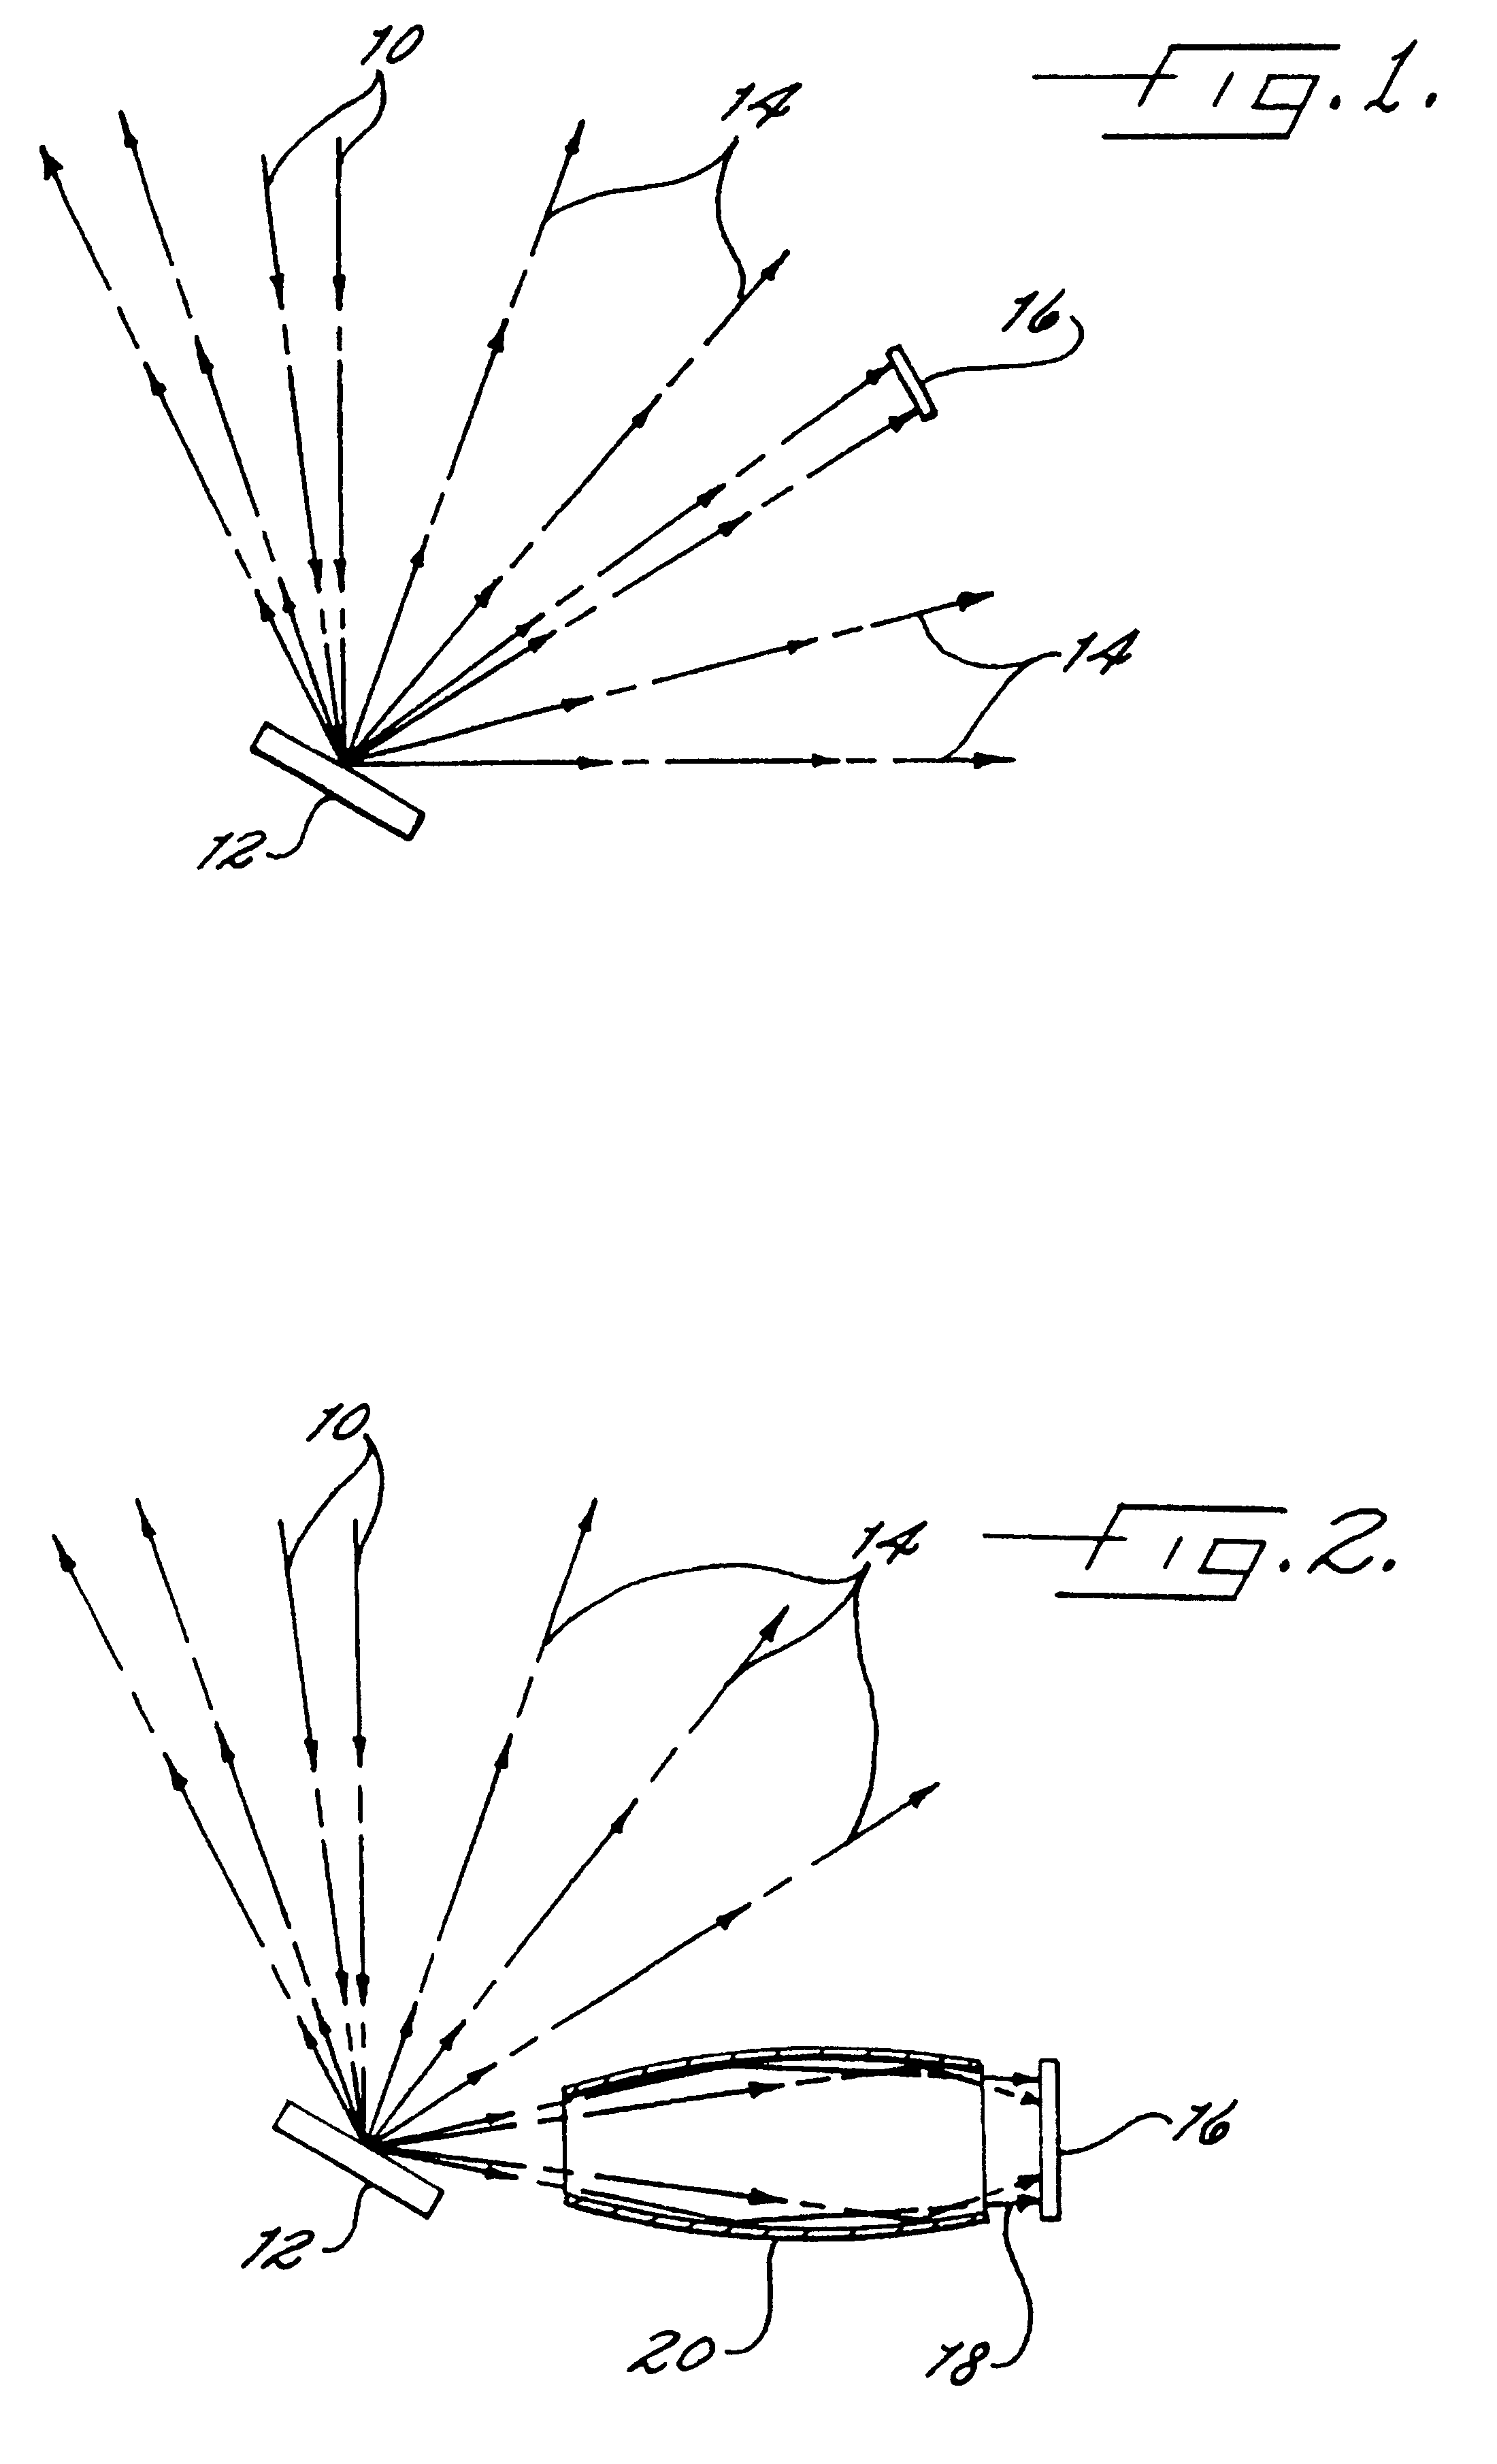 Apparatus and method for improved energy dispersive X-ray spectrometer